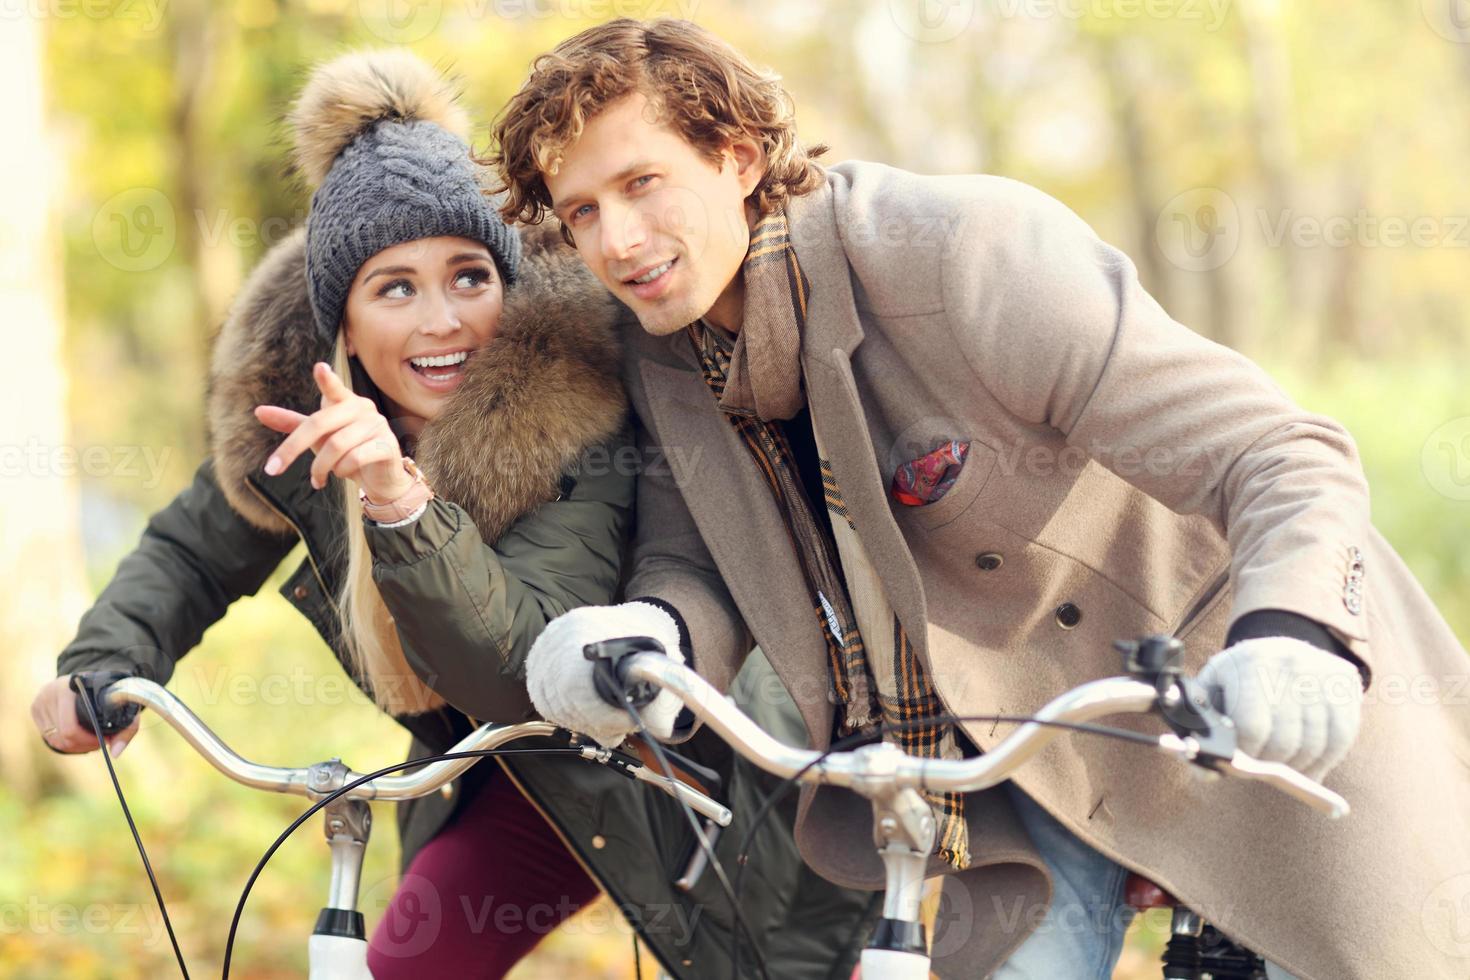 Happy couple on bikes in forest during fall time photo